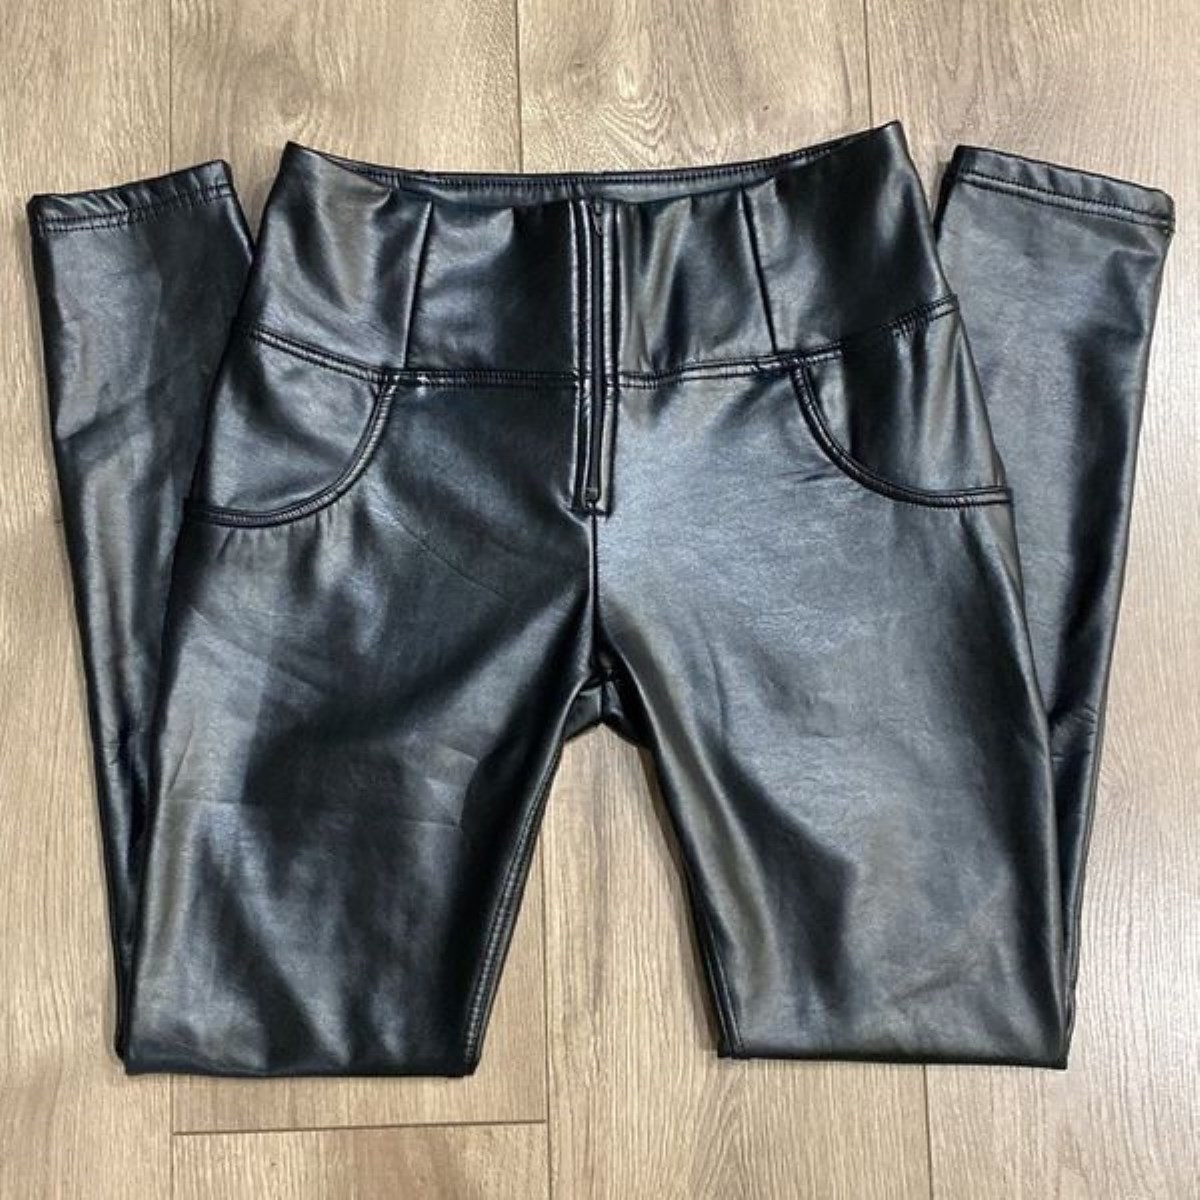 How To Store Faux Leather Pants